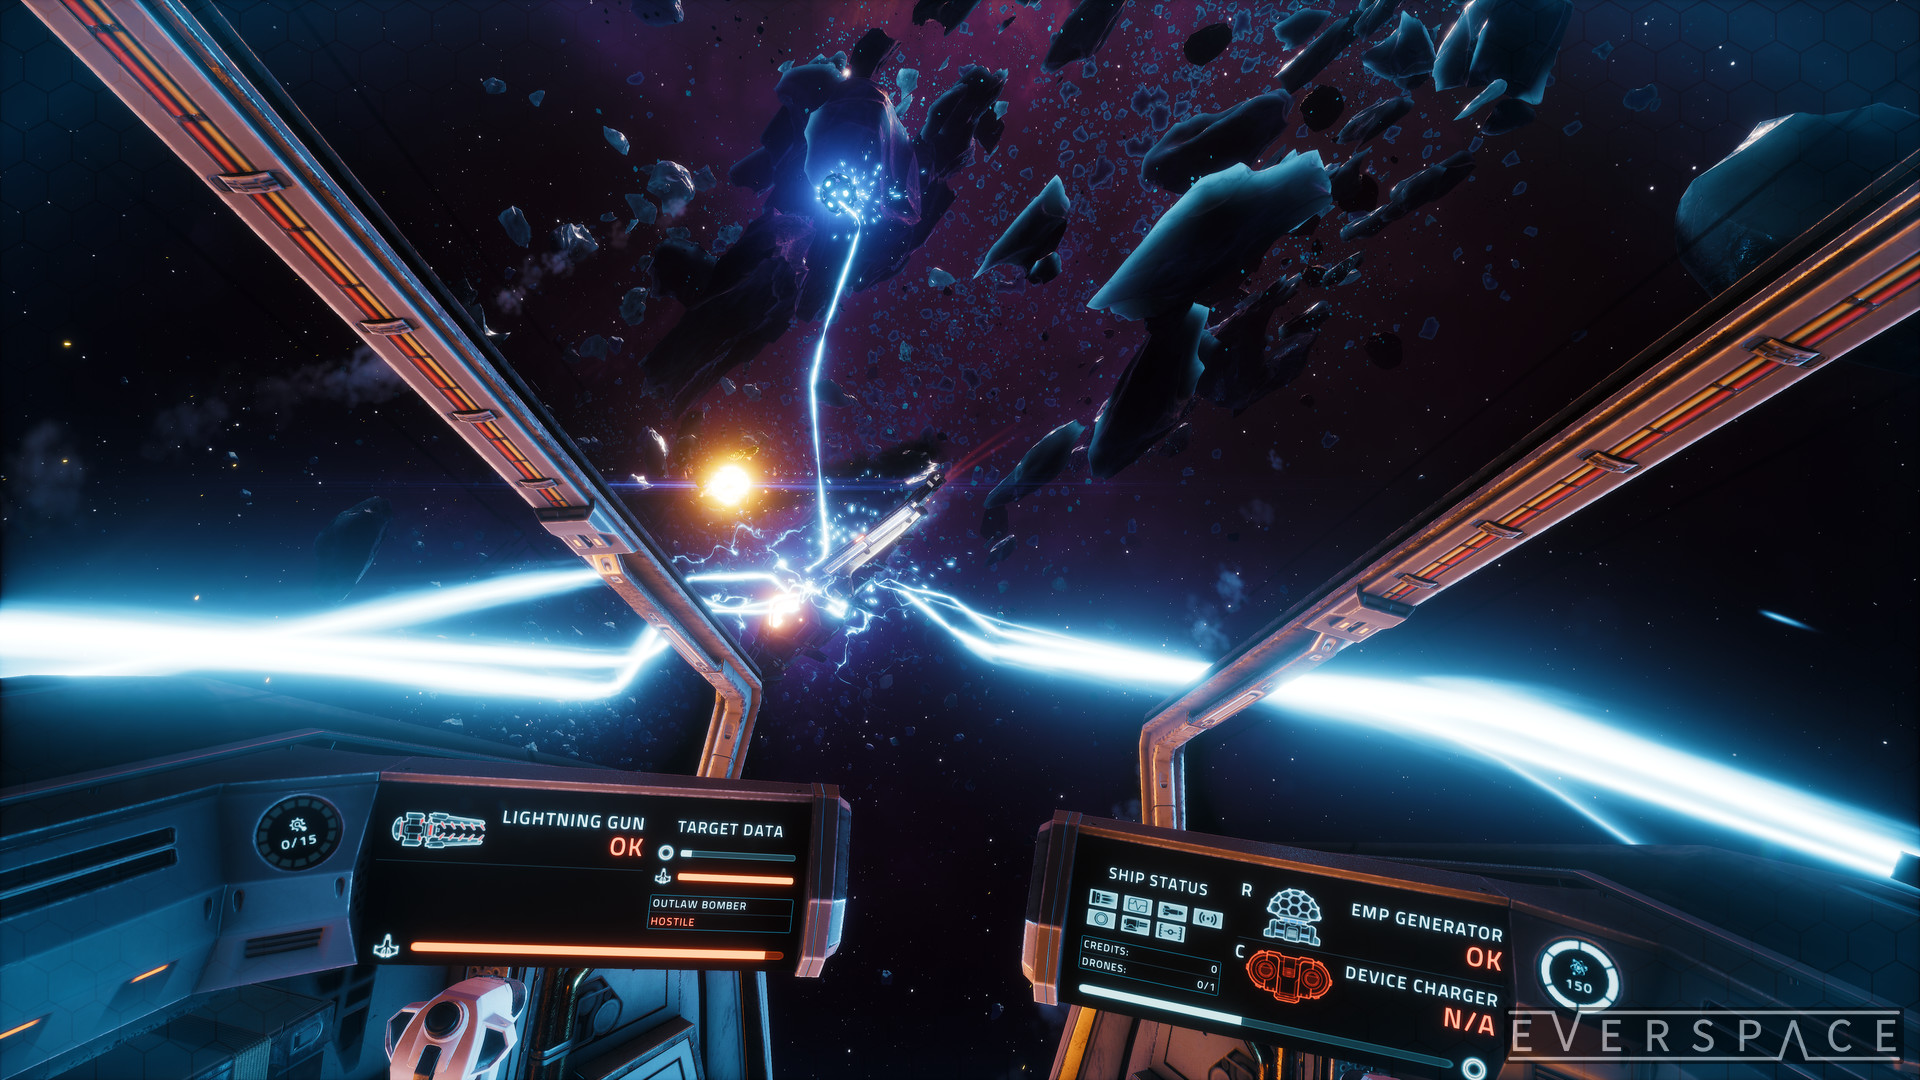 EVERSPACE – Encounters Pc Game Free Download Torrent